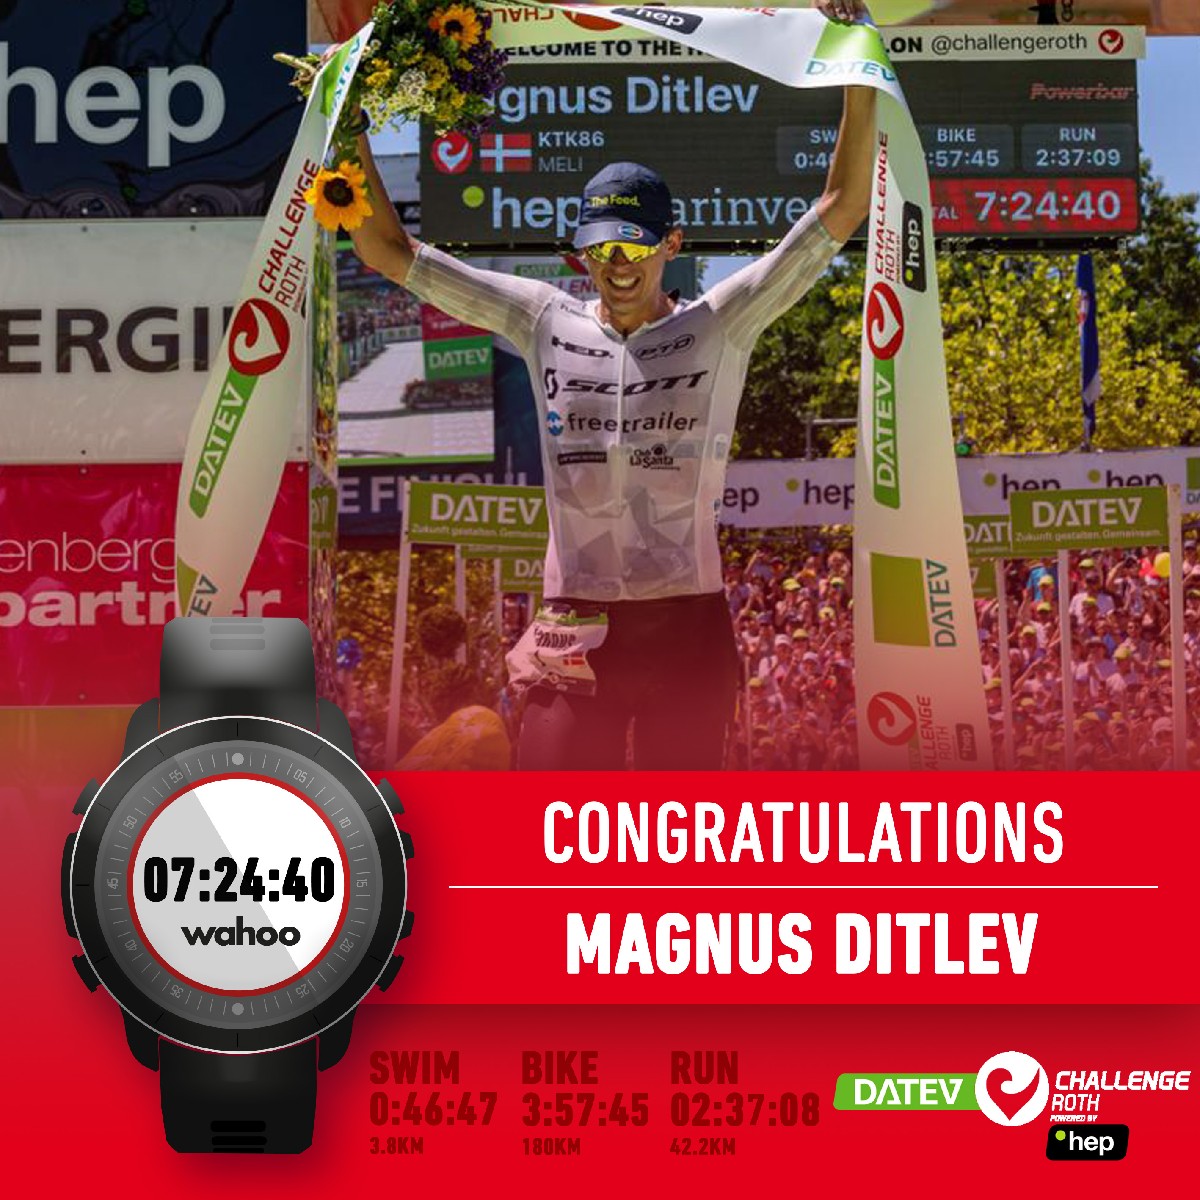 As the age group athletes and relay teams continue to run into the night here in Roth, let's take a look at the times that made up today's record-breaking performances by Magnus Ditlev and Daniela Ryf! #wearetriathlon